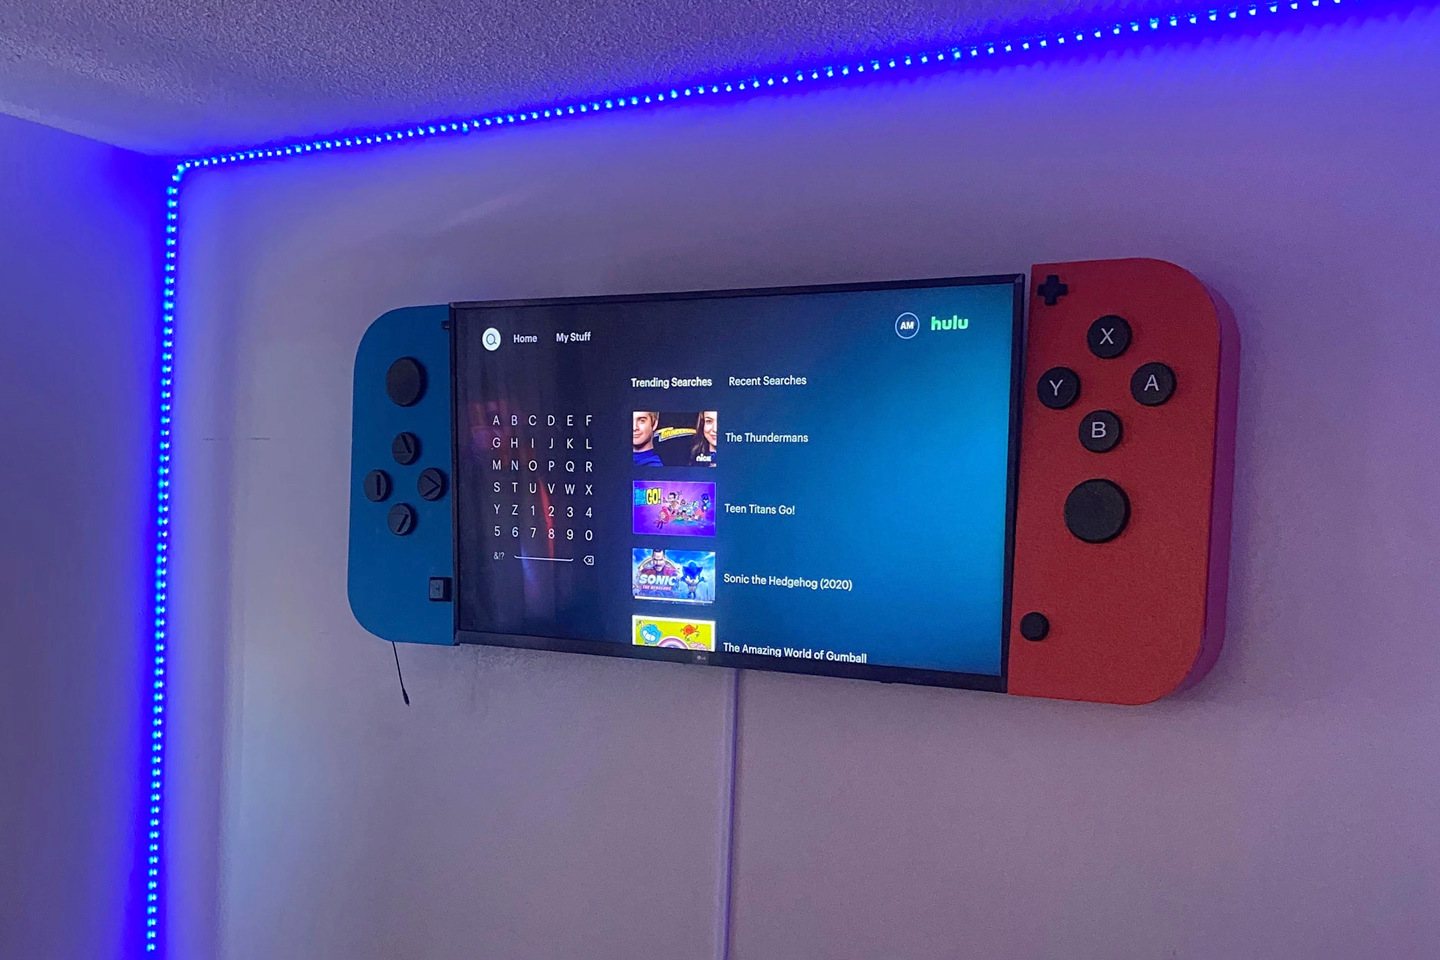 #JoyCon-shaped TV cabinets attach to the sides of your television, turning it into a massive Nintendo Switch!